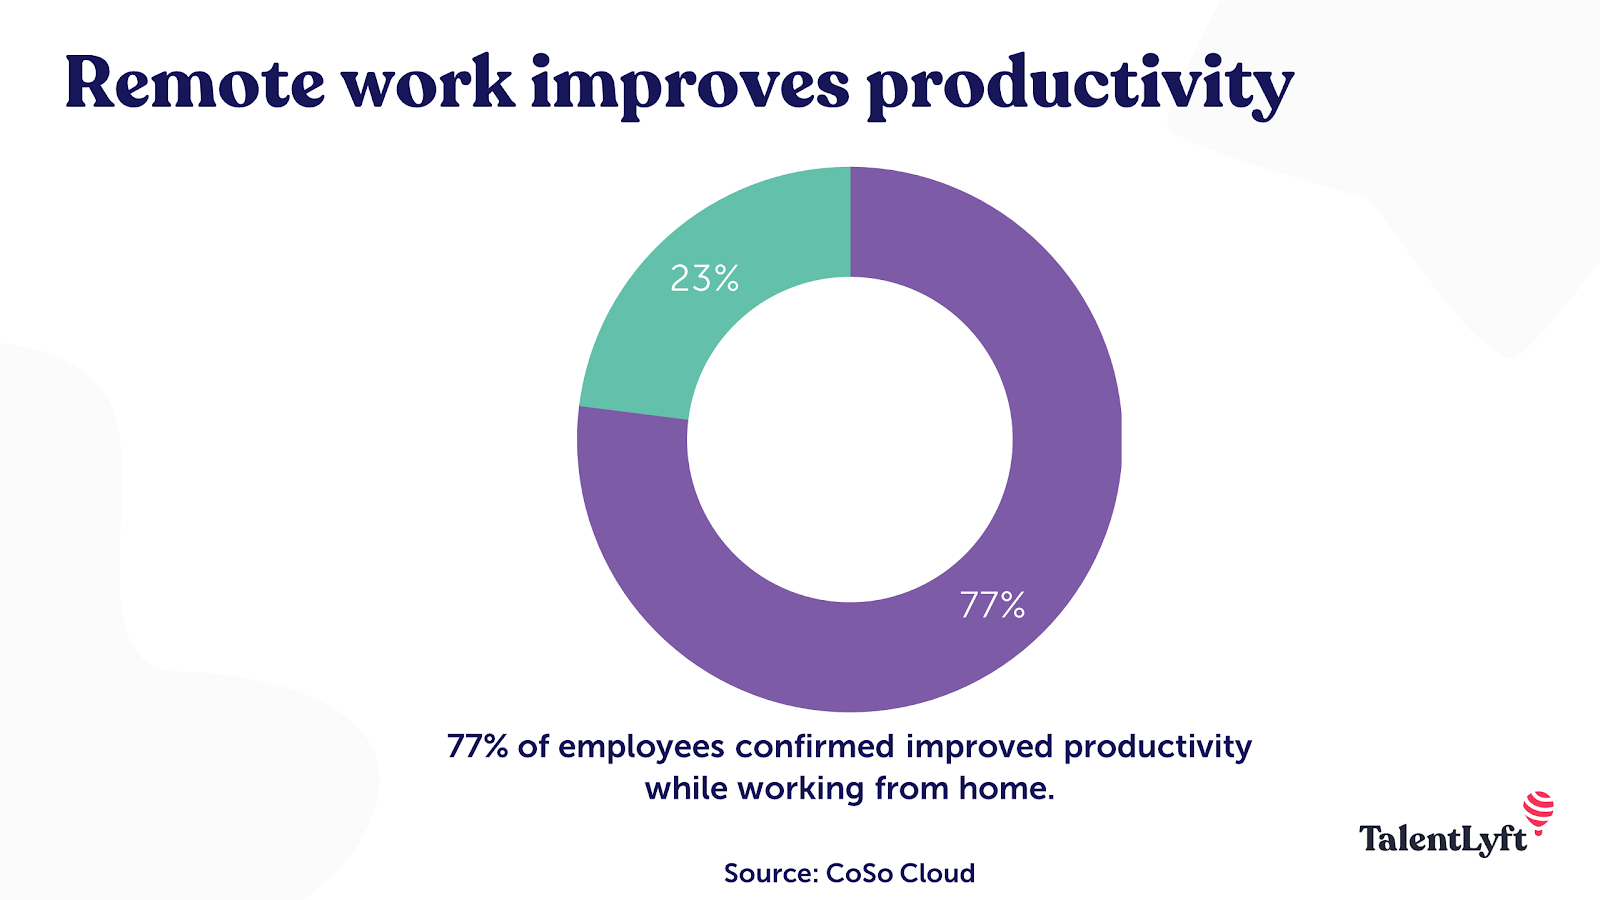 Remote work improves employee productivity